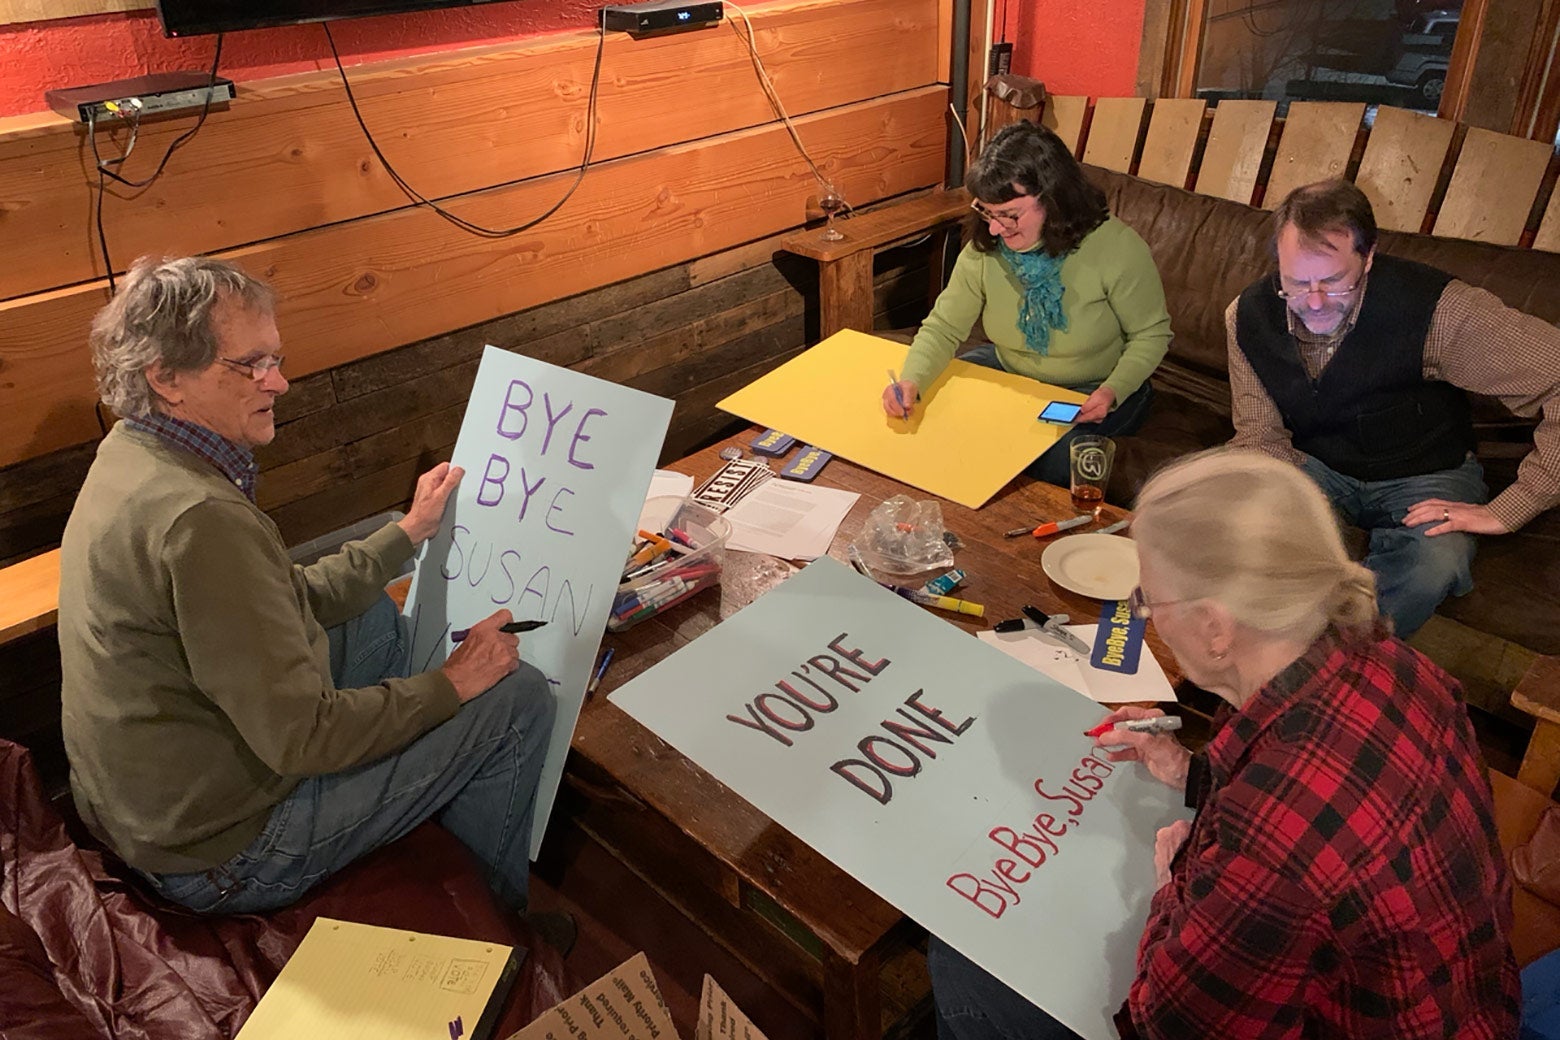 Two men and two women sit around a table making protest signs.